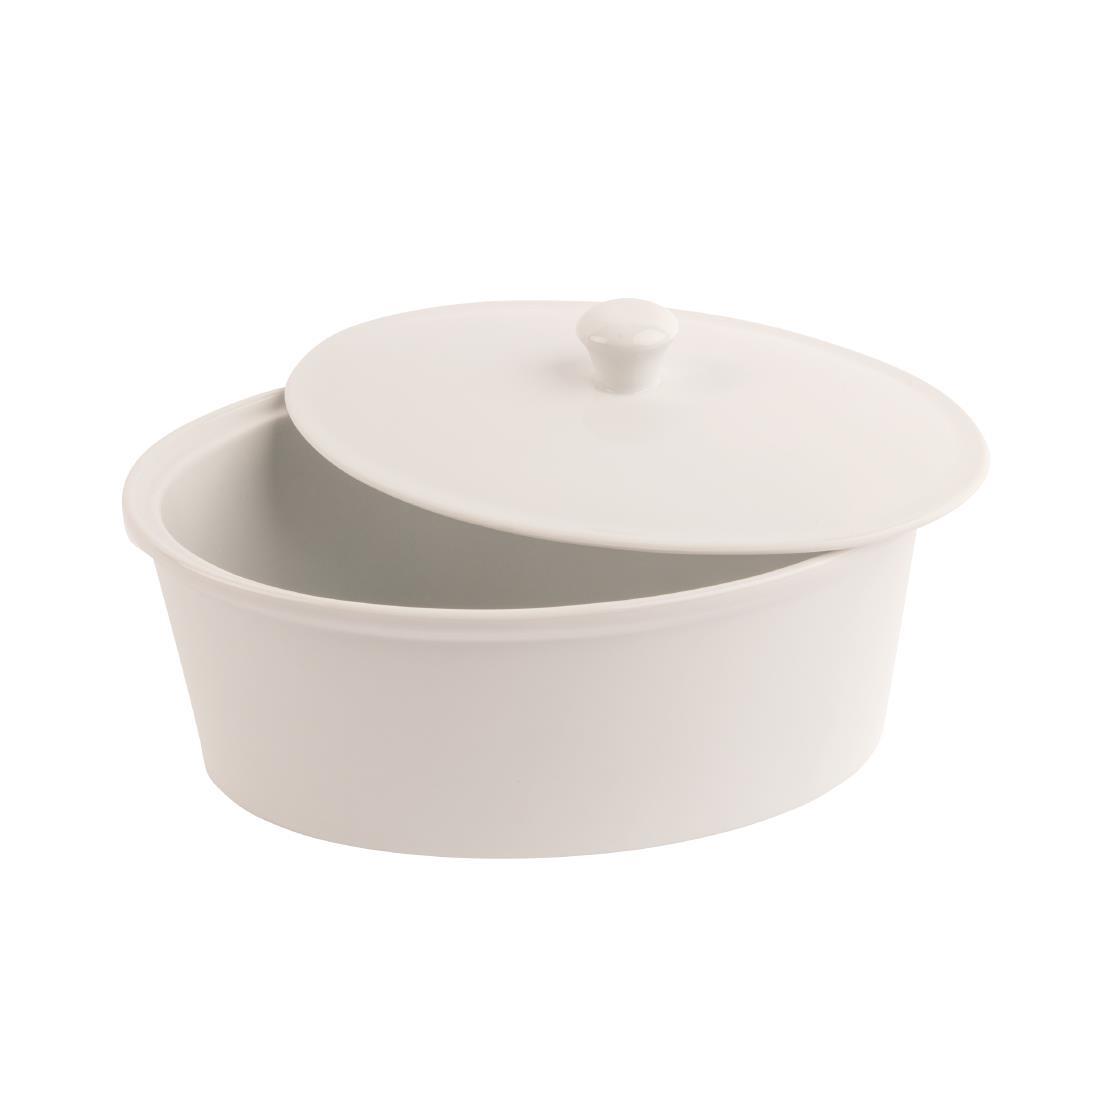 Olympia Whiteware Oval Casserole Dish with Lid 2.2Ltr - CB712  - 5